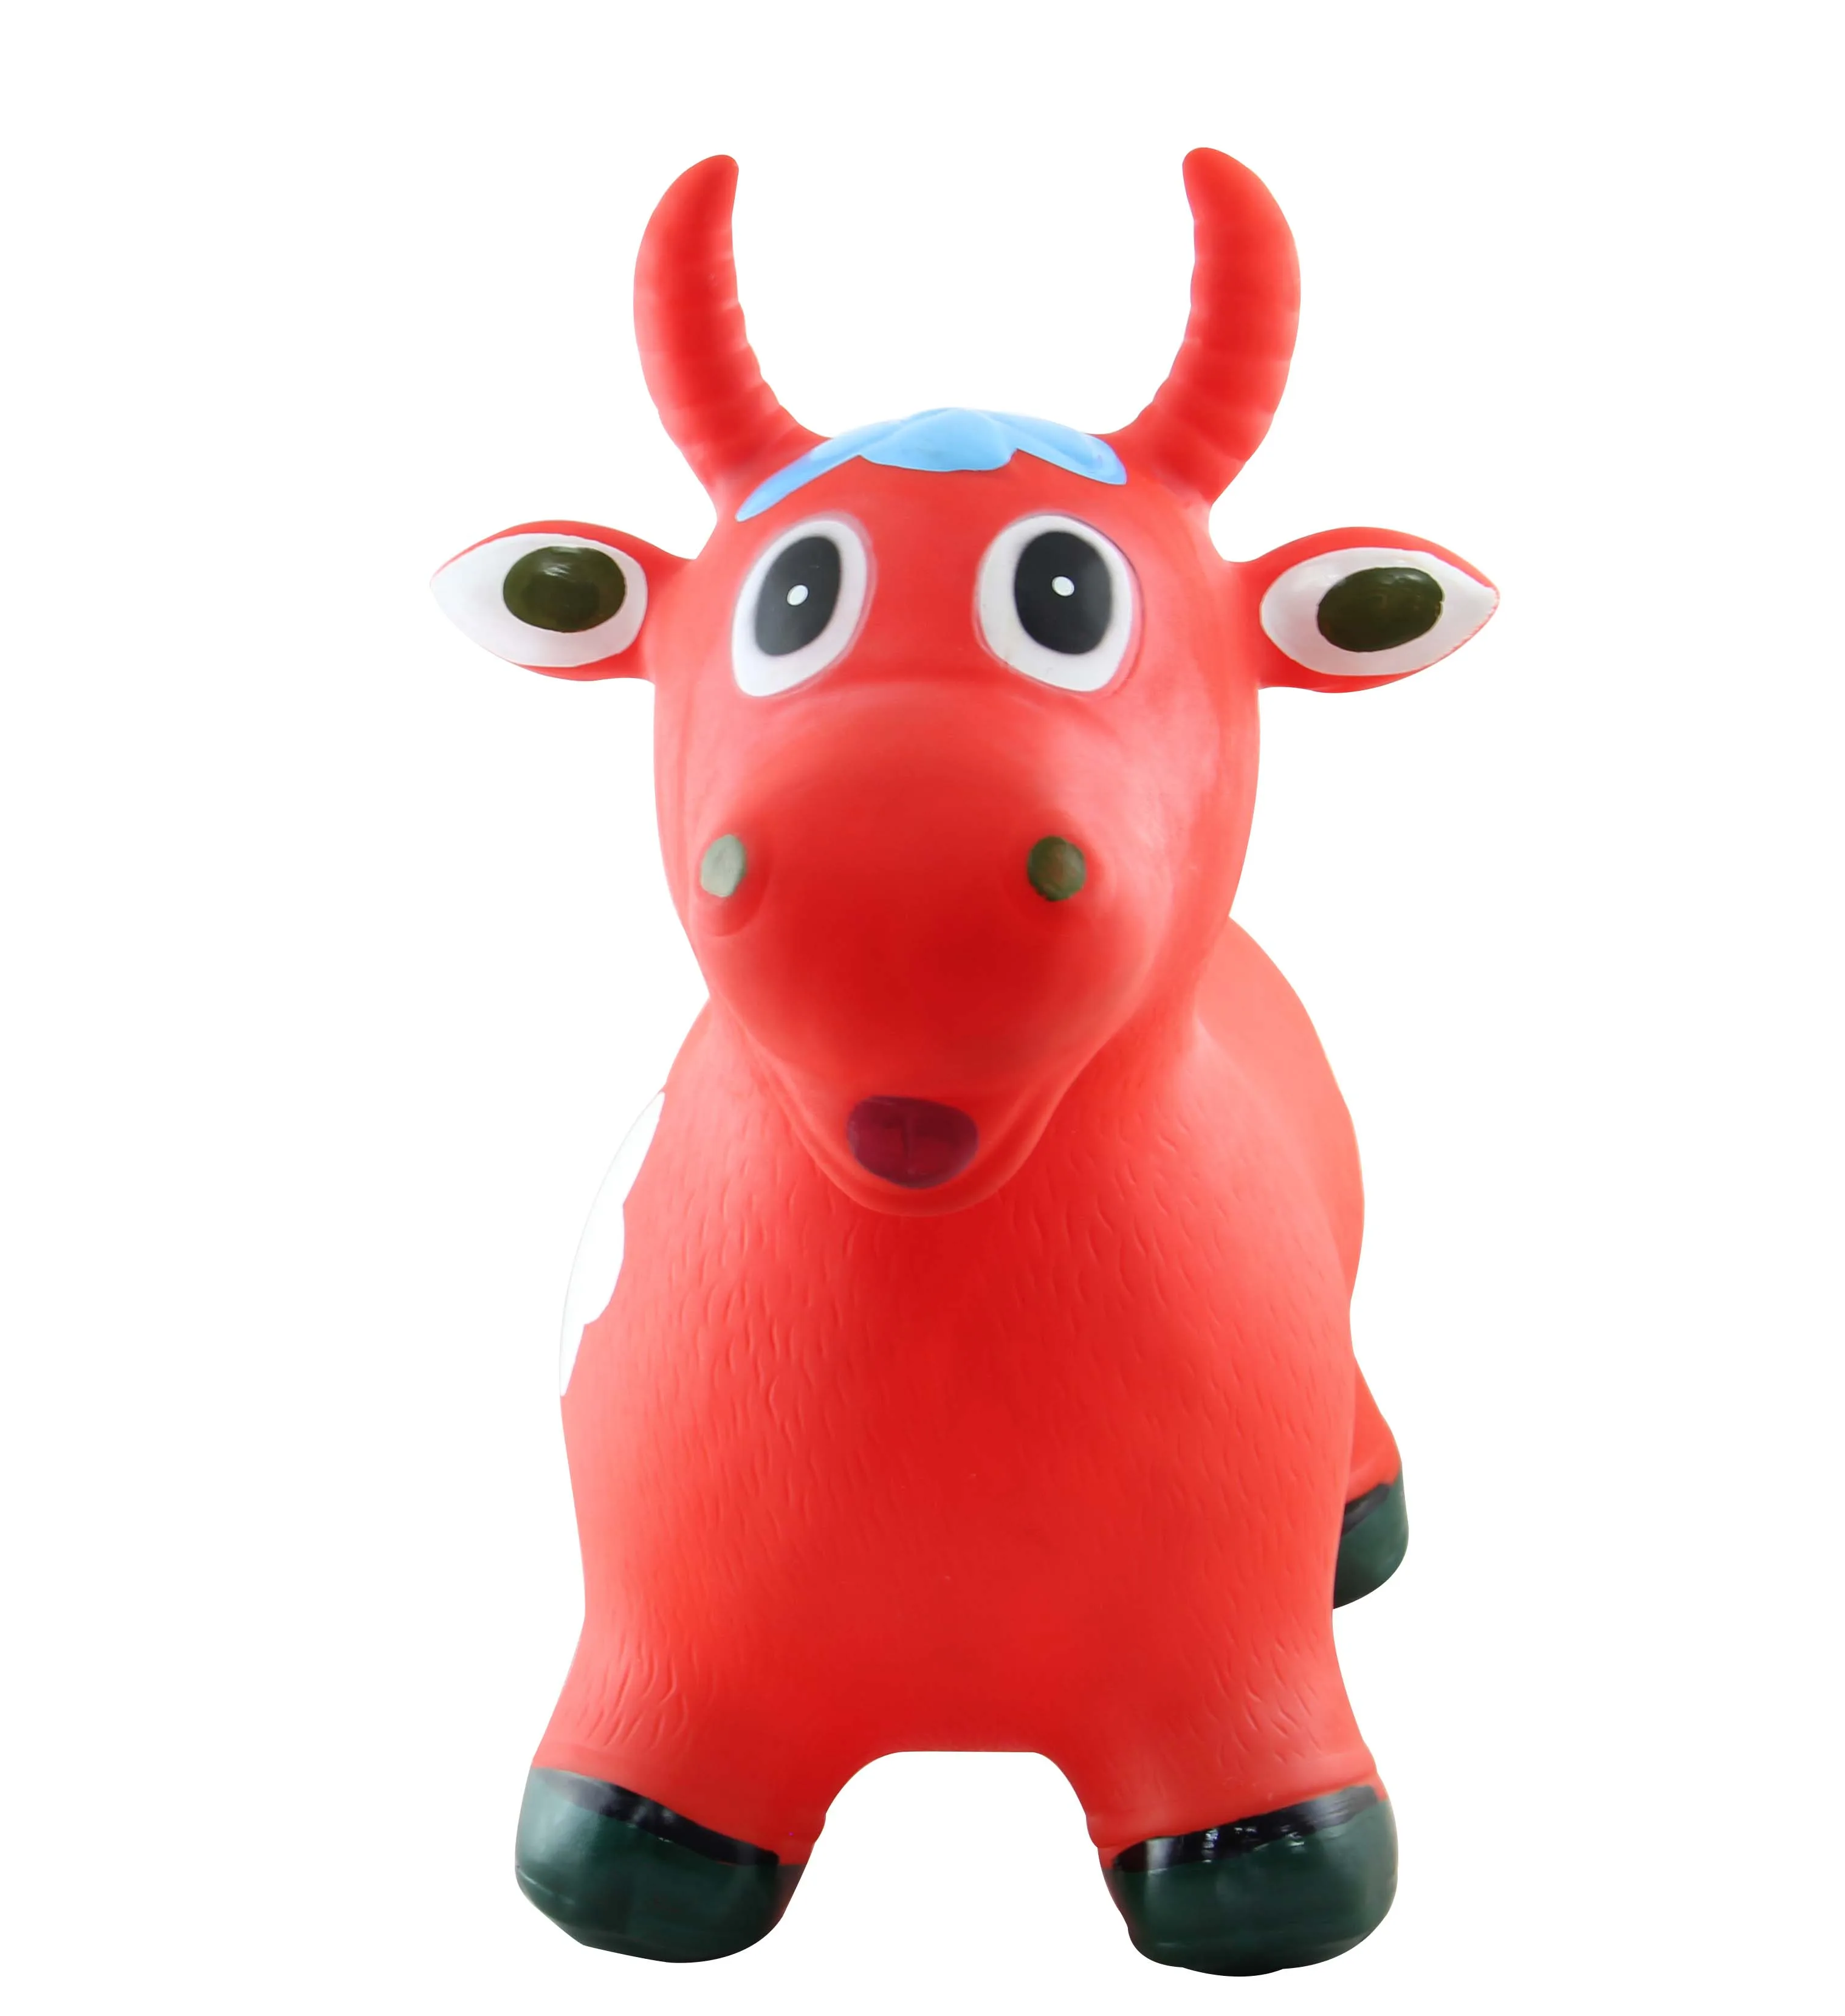 Jumping Animal Toys-green Cow Other Toy Animal Soft PVC